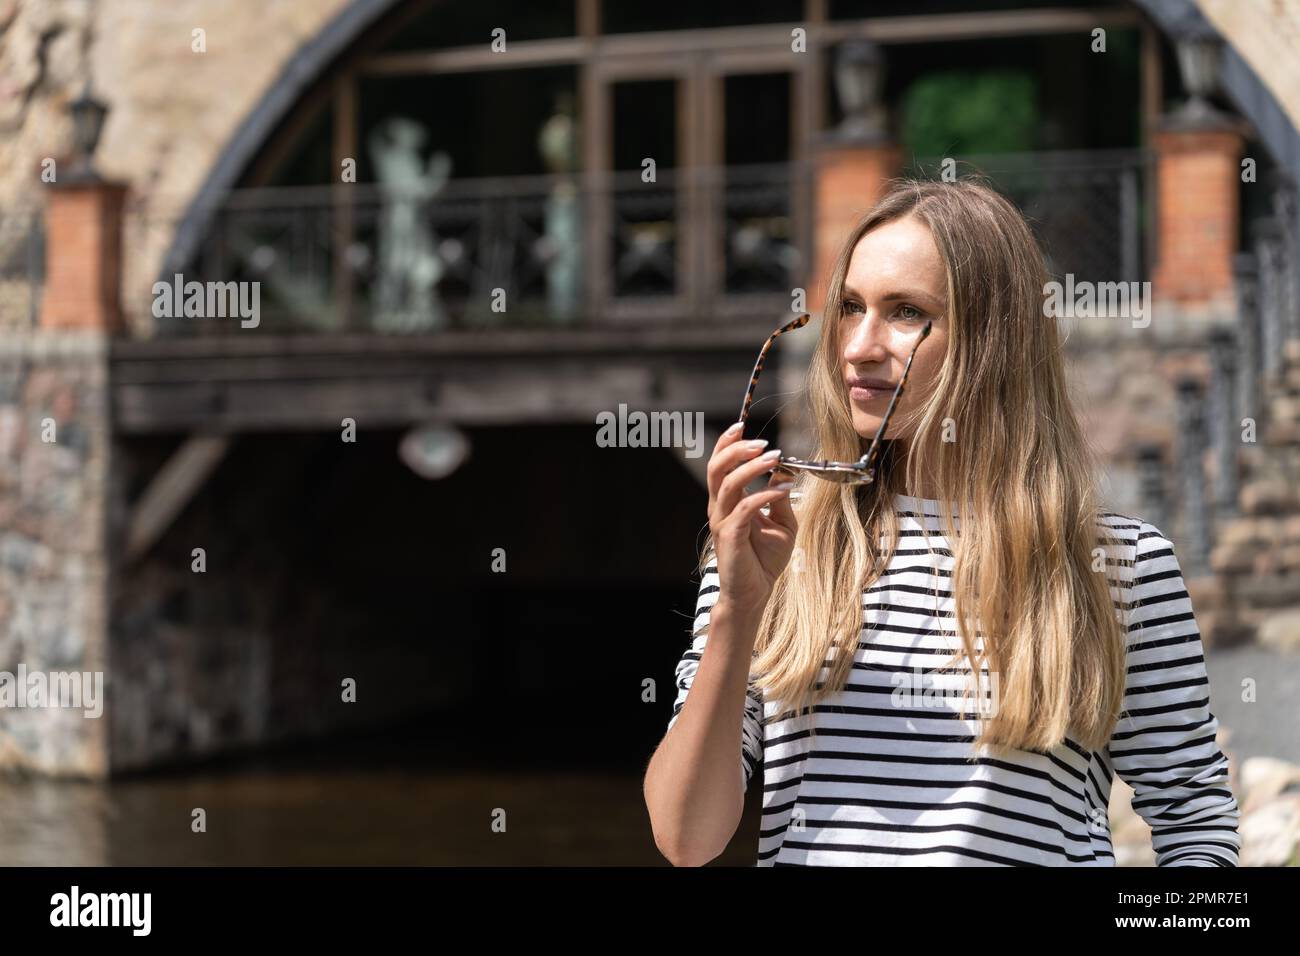 Long-haired woman takes off her sunglasses looking away. Stock Photo